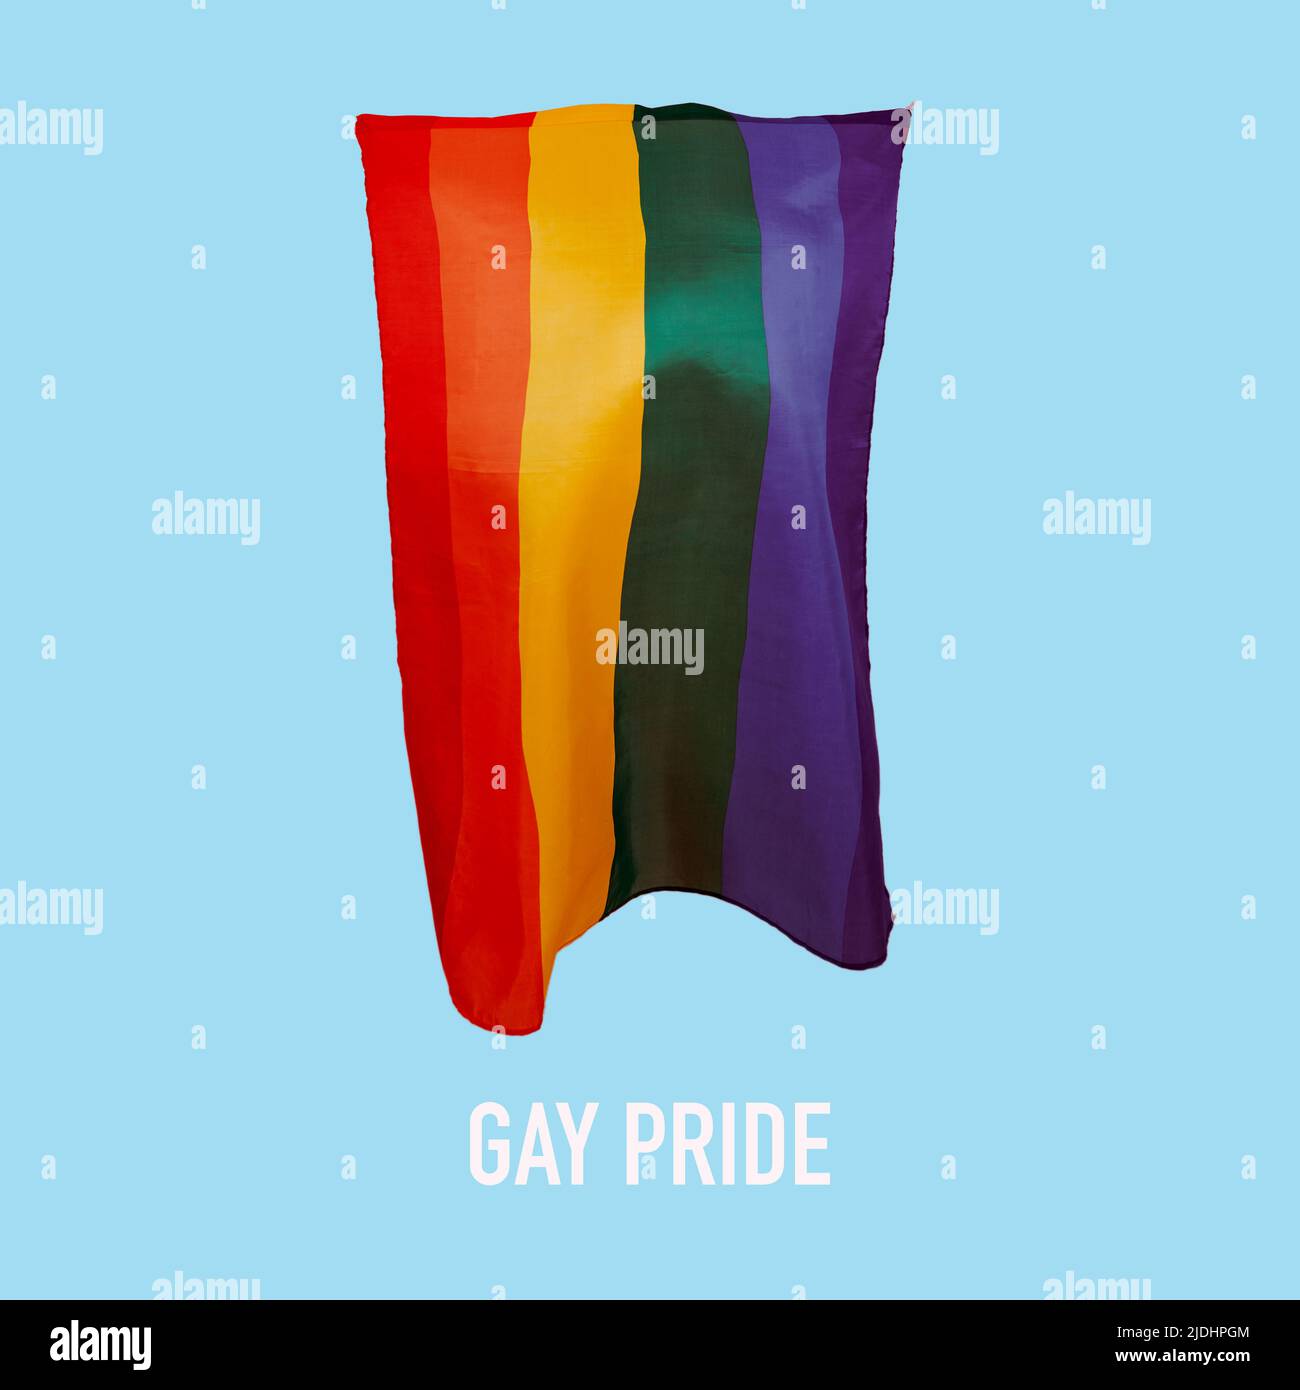 text gay pride and a rainbow pride flag waving in the air against a blue background Stock Photo